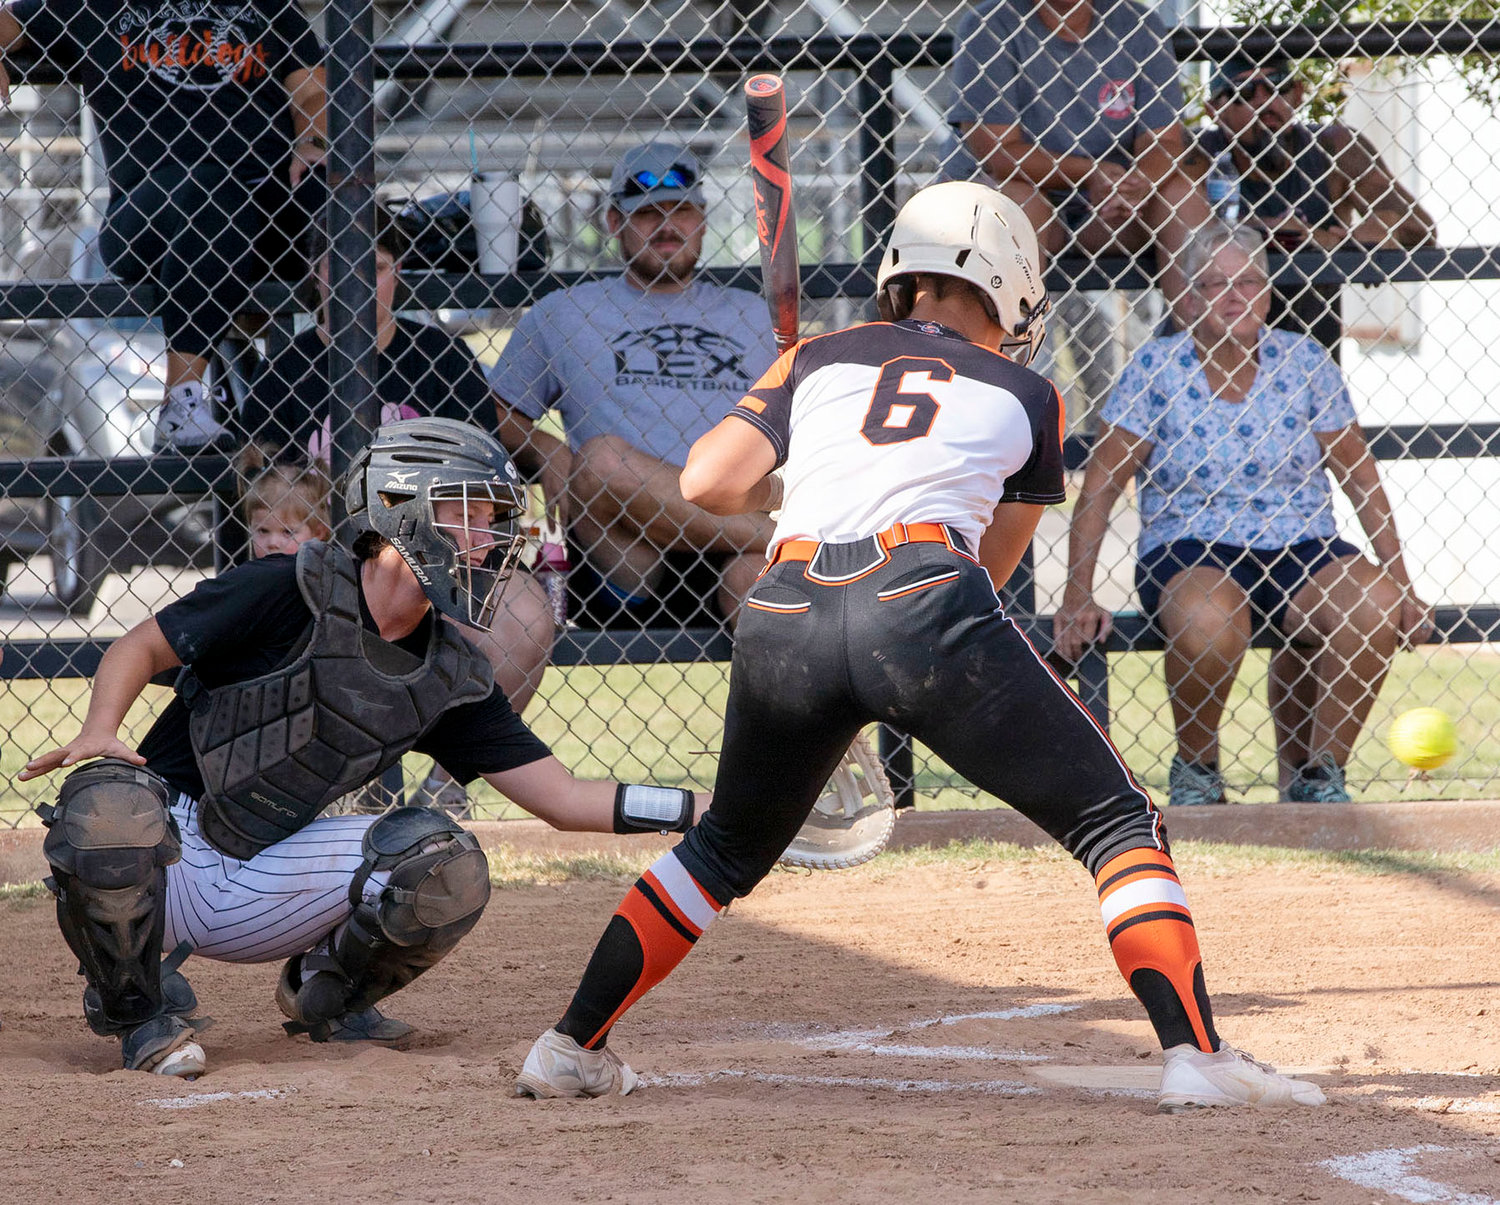 Lexington junior Izzy Pack takes a pitch during Lexington’s 12-1 win over Meeker. Pack had three RBIs in the game.